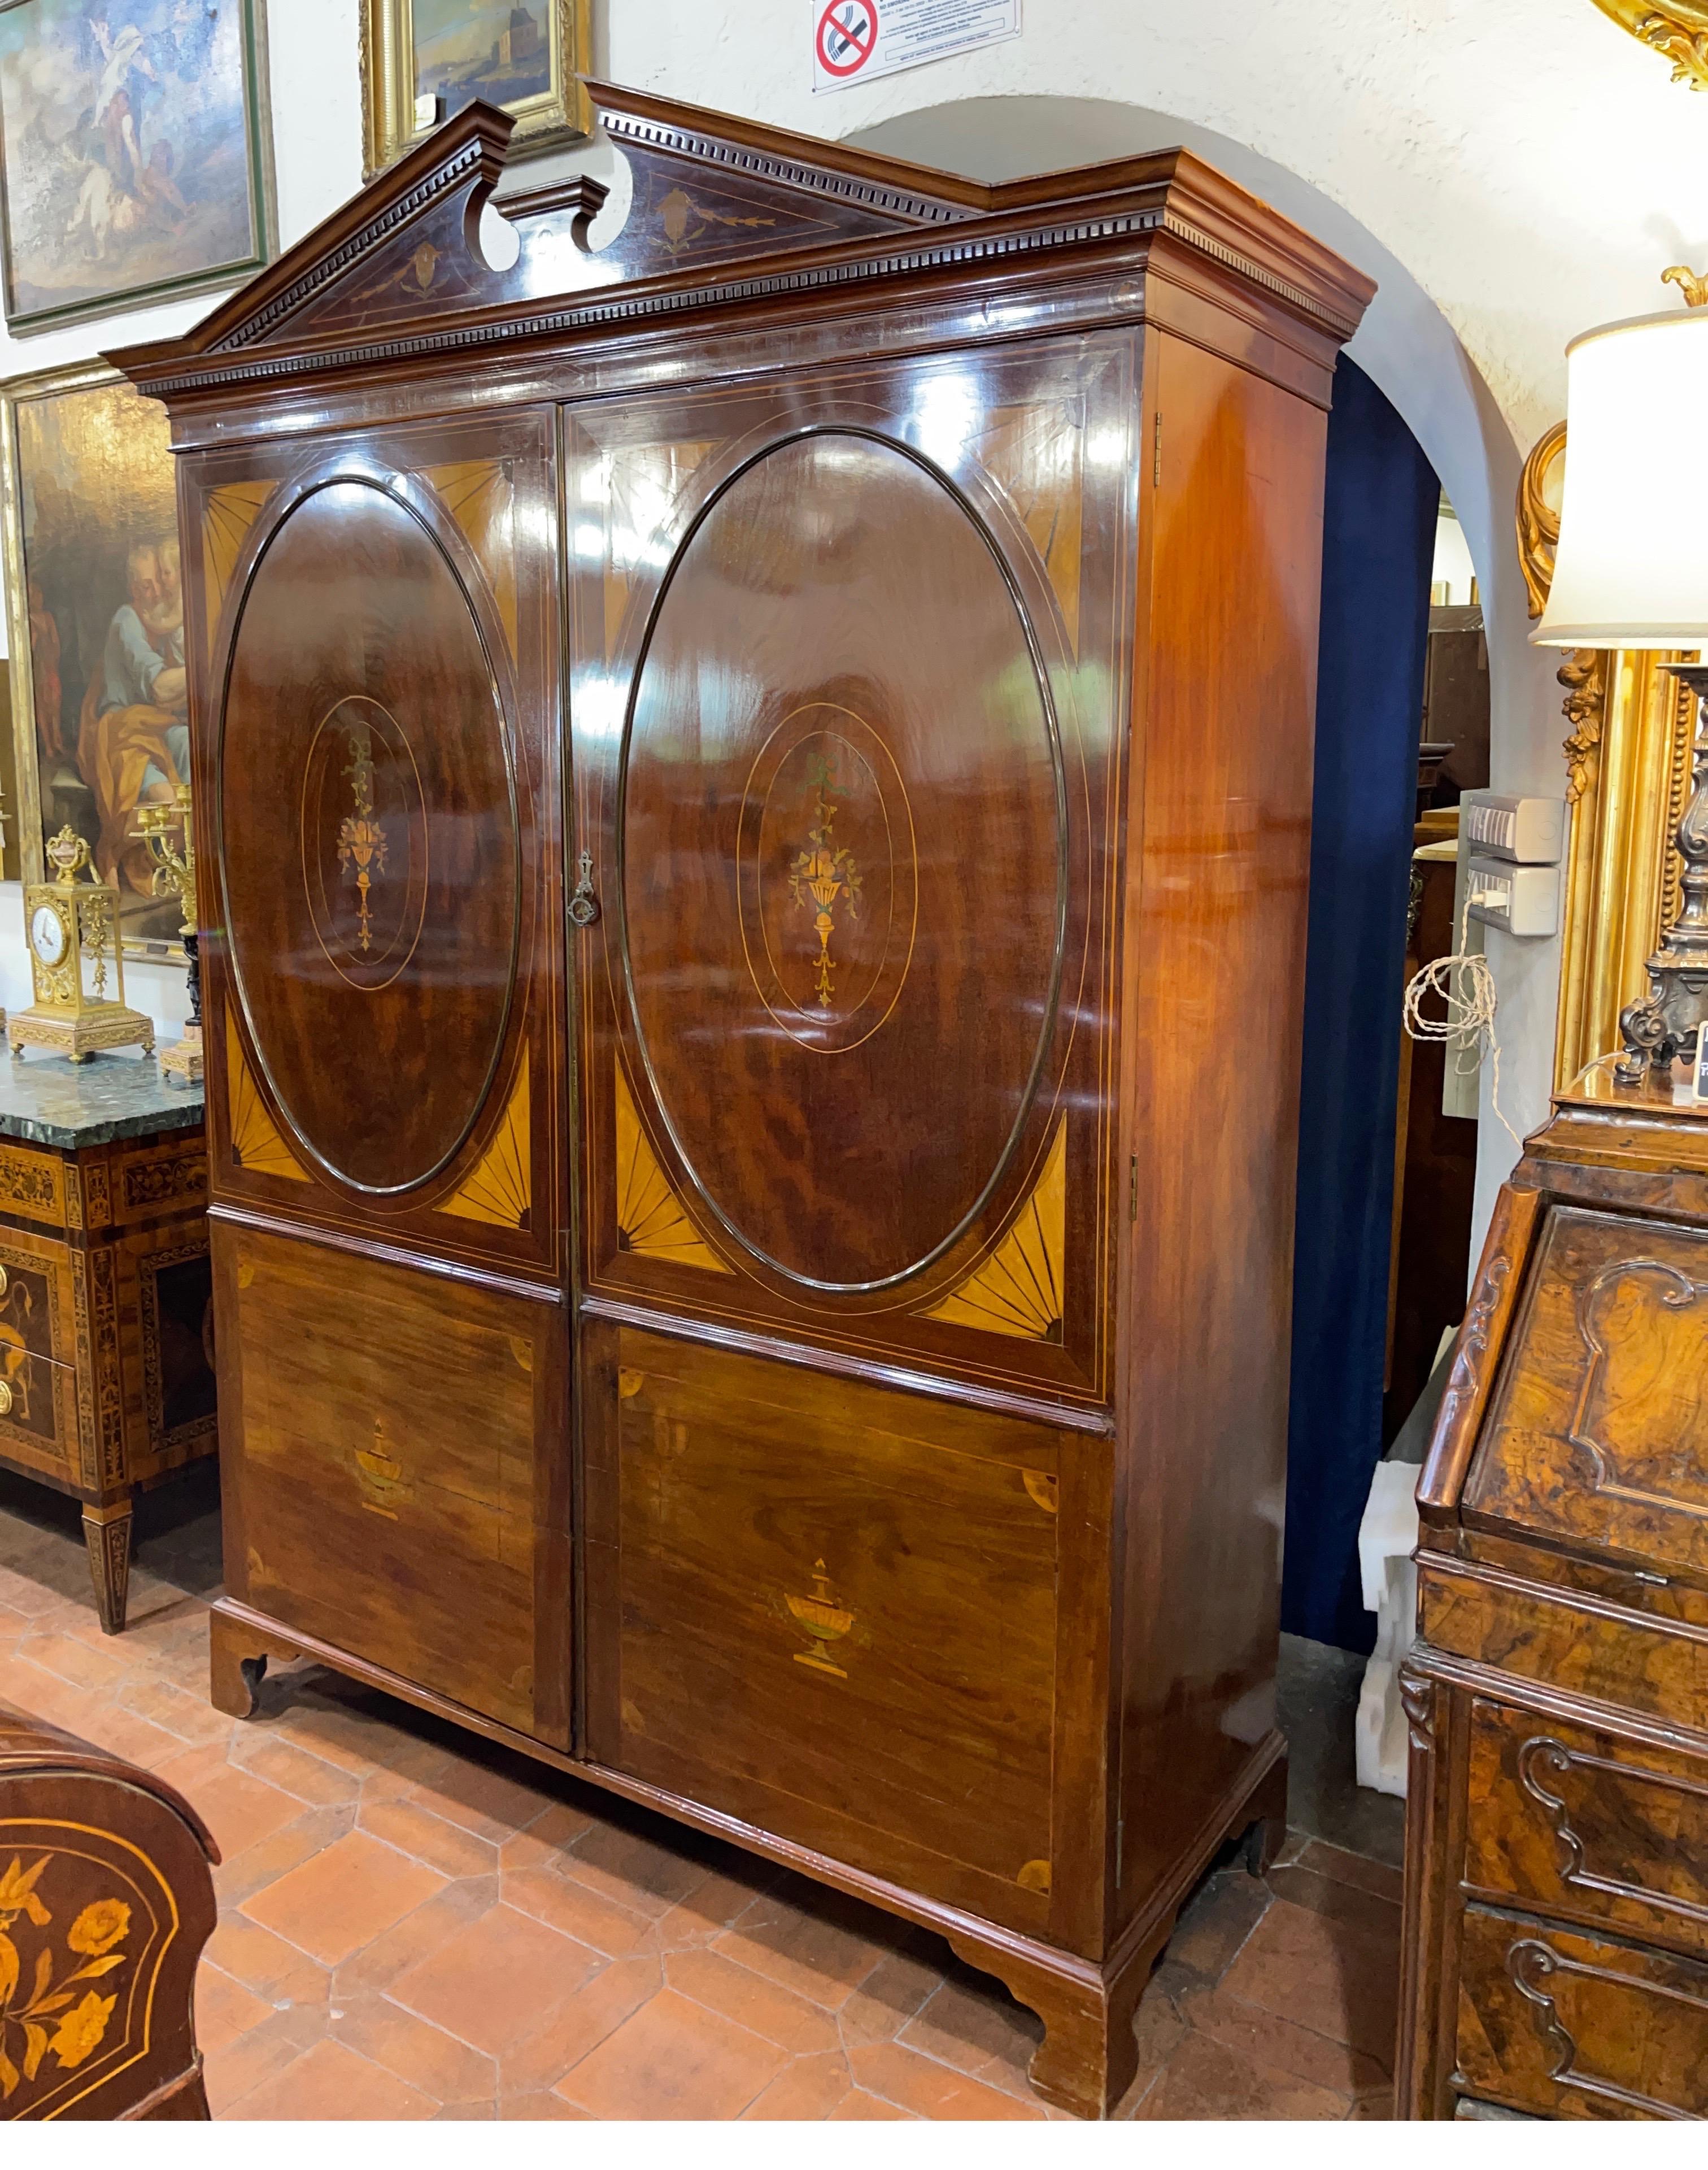 Exceptional English cabinet first Victorian period, Sheraton style, with very elegant forms embellished with classic inlaid Sheraton on the front, hat temple also inlaid.
in excellent state of preservation, however, needs a restoration. The two